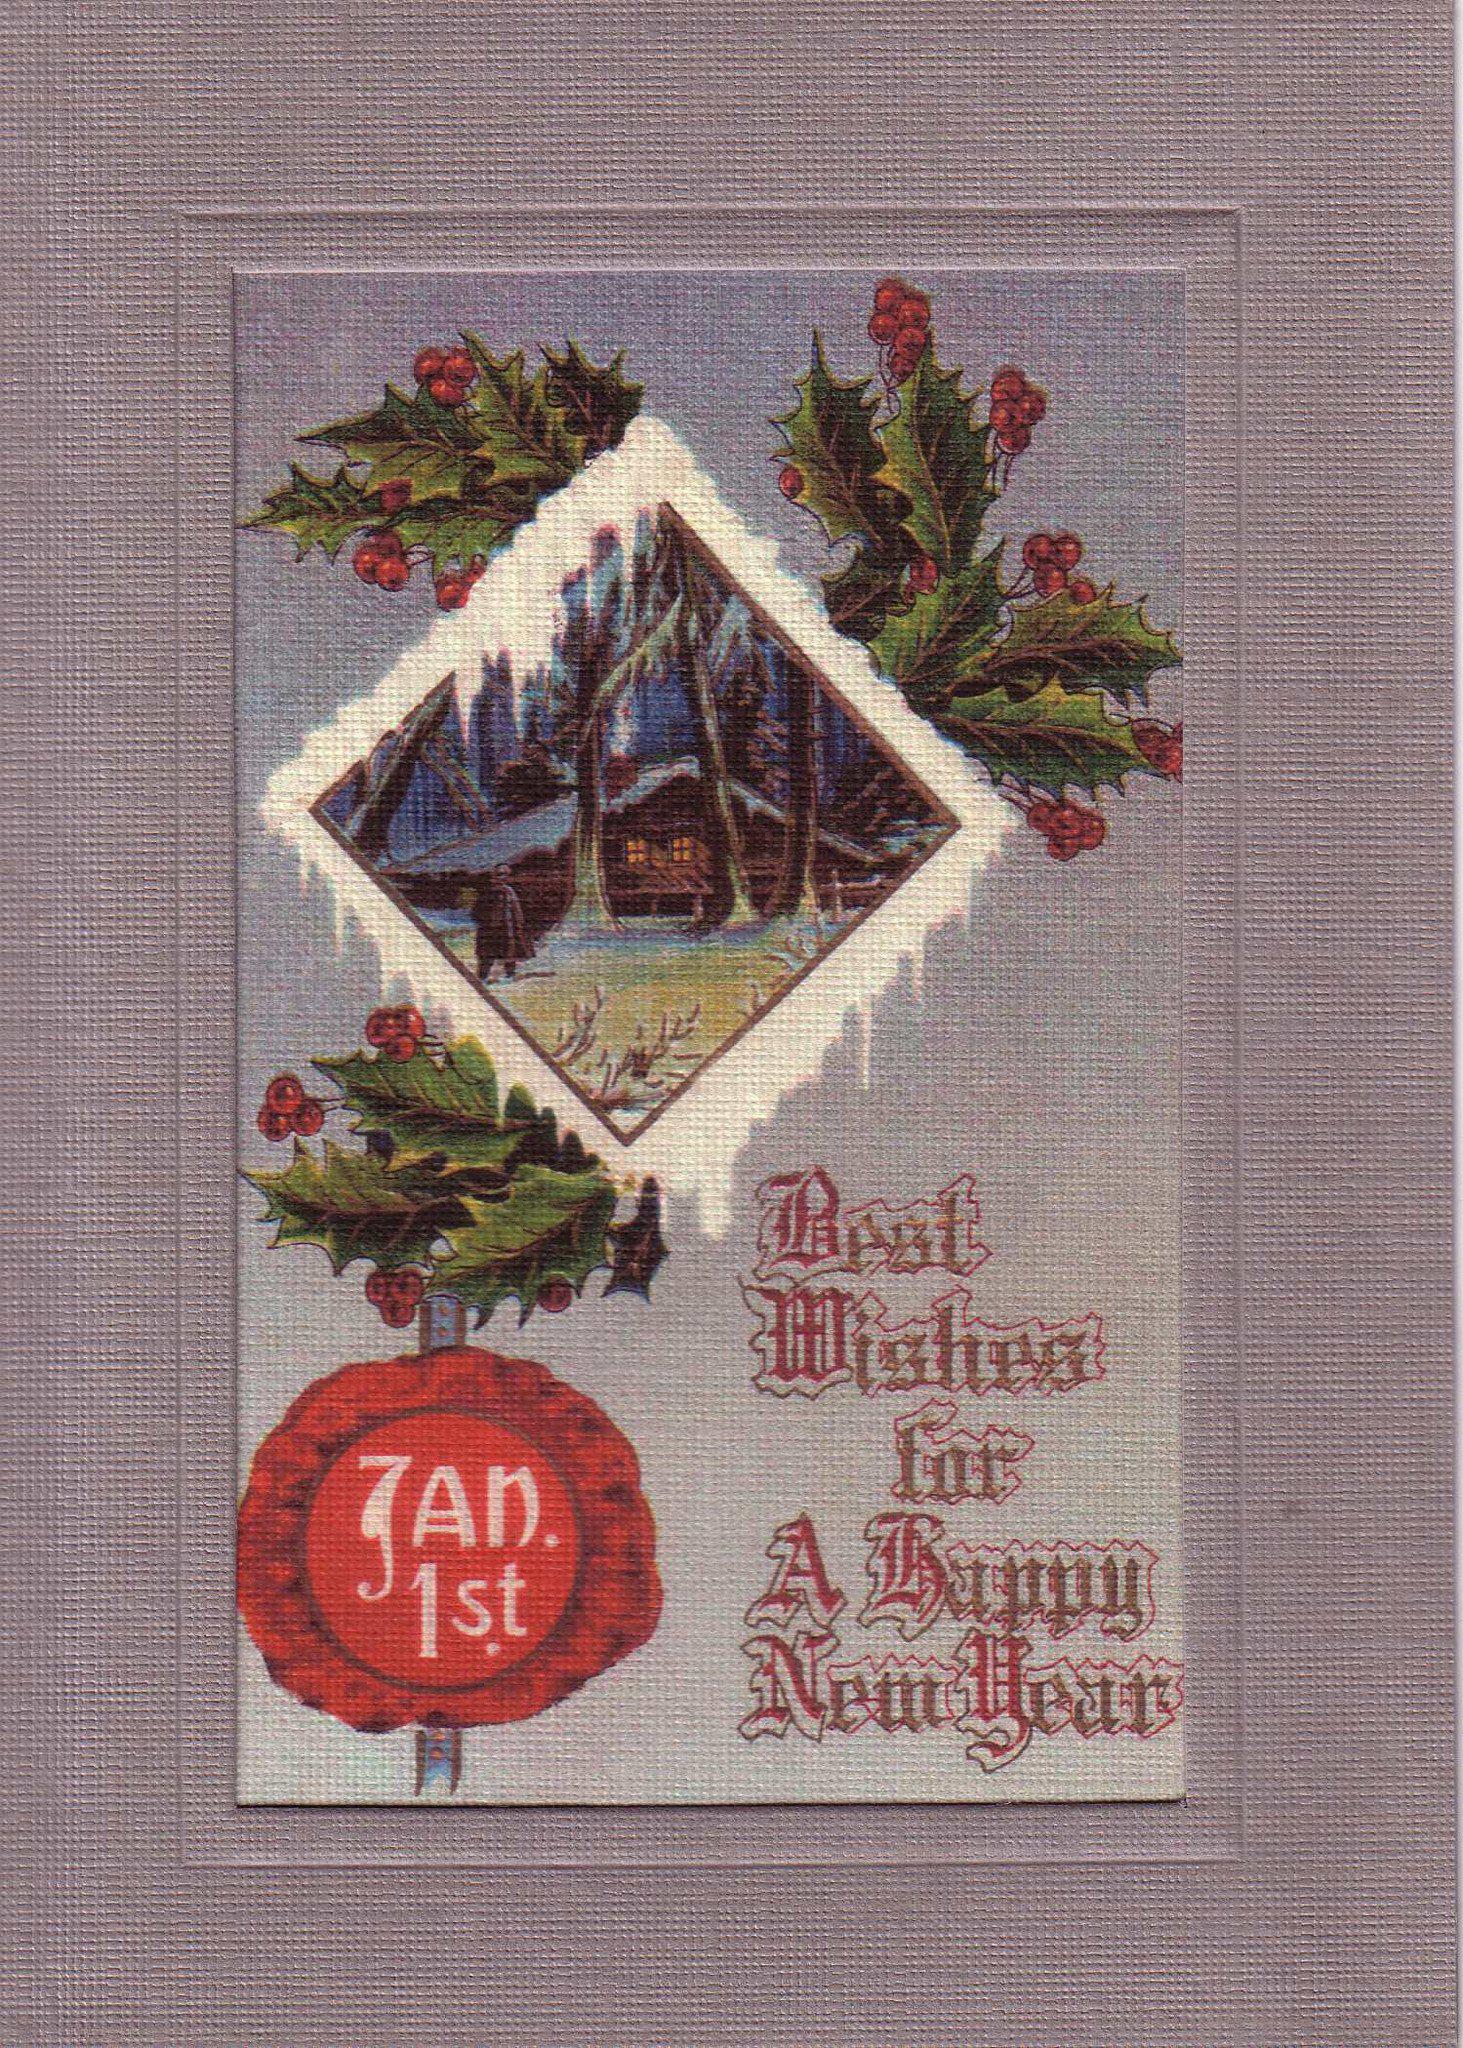 Best Wishes New Year-Greetings from the Past-Plymouth Cards